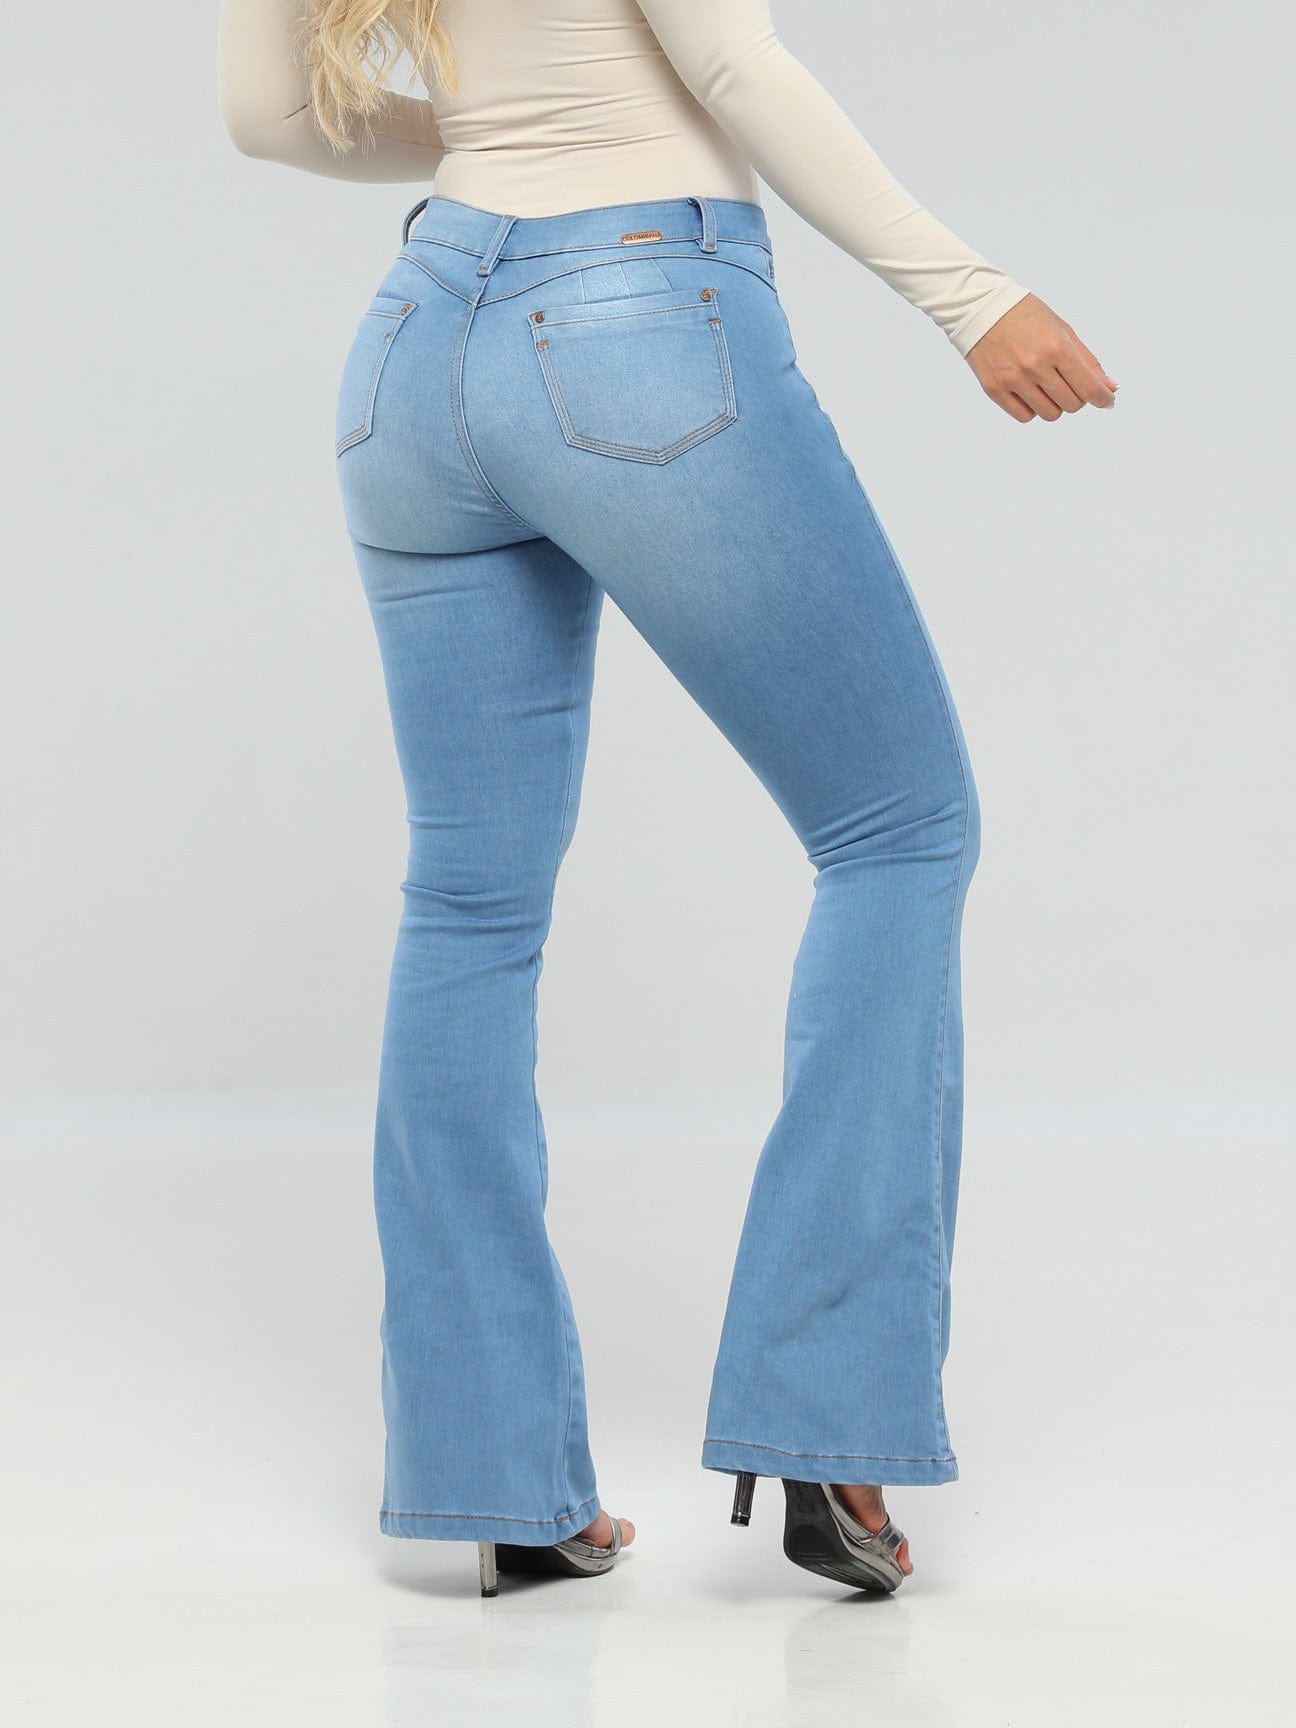 Ropa Colombiana Jeans Colombianos Originales K570, Ropa Col…